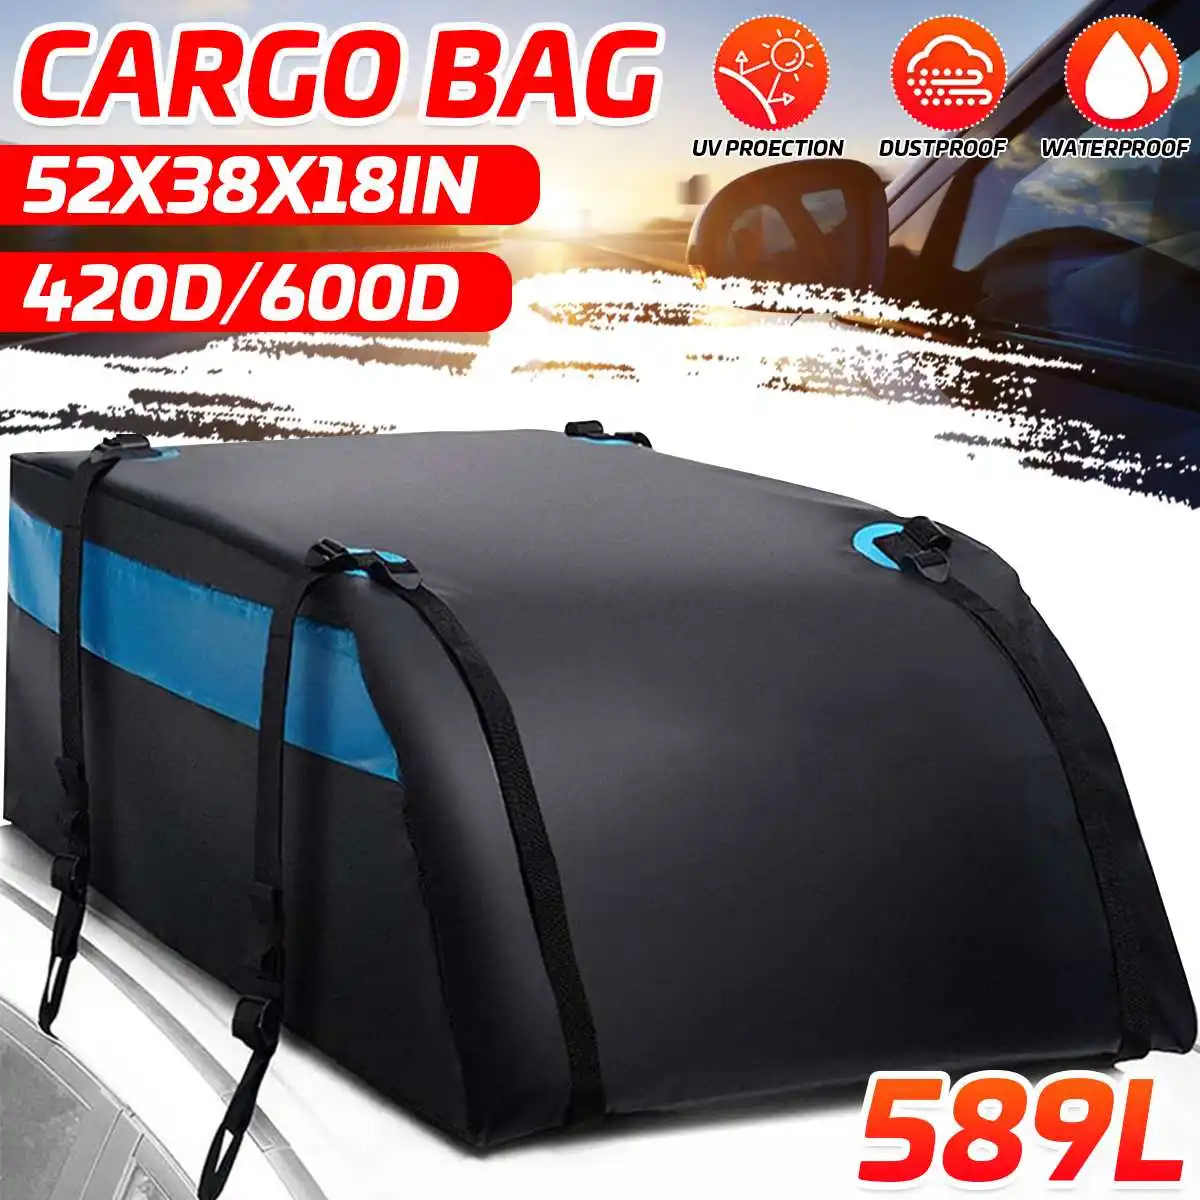 

600D/420D 120x90x44cm Large Waterproof Car Cargo Roof Bag Rooftop Luggage Carrier Black Storage Cube Bag Travel SUV Van For Cars